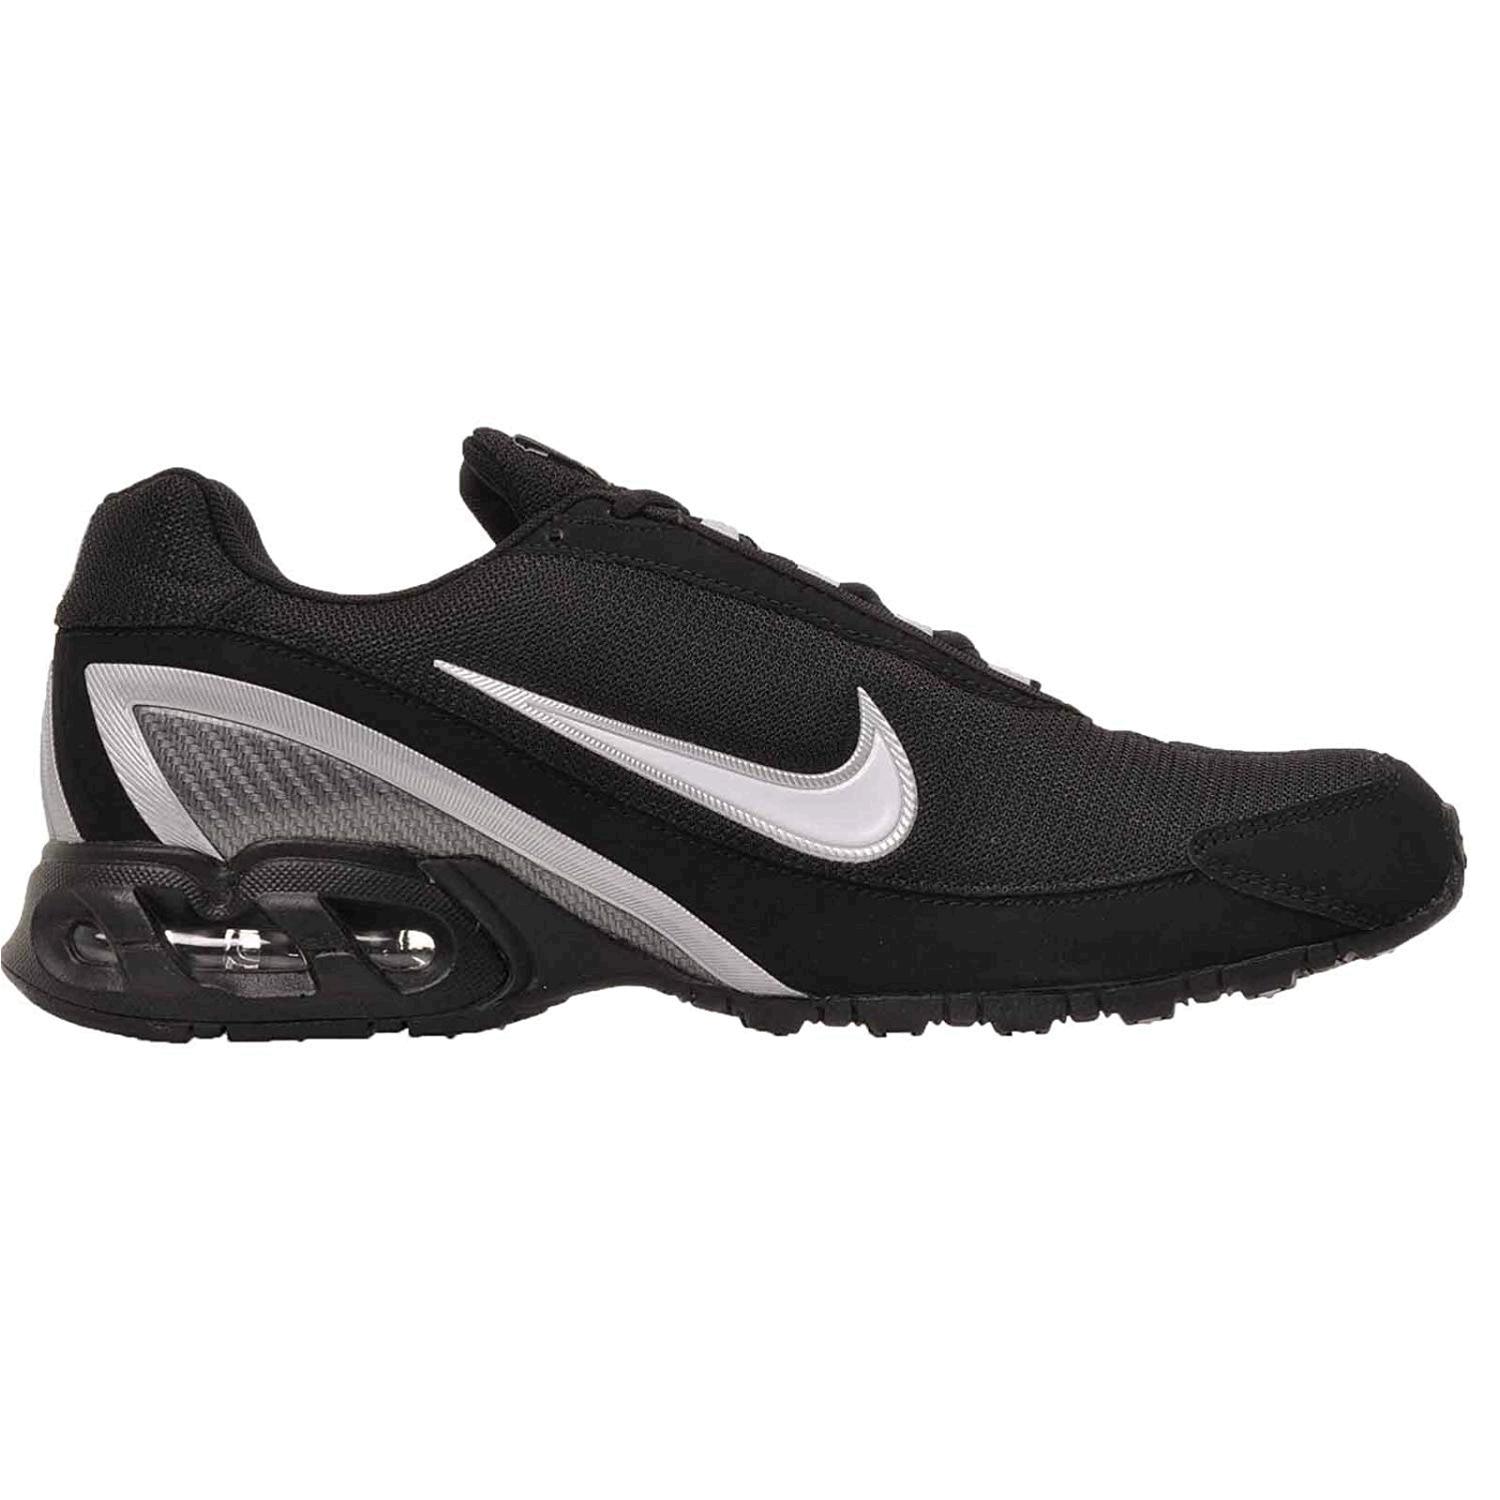 Nike Air Max Torch 3 Men's Running Shoes, Black/White, Size 12.5 dUUr ...